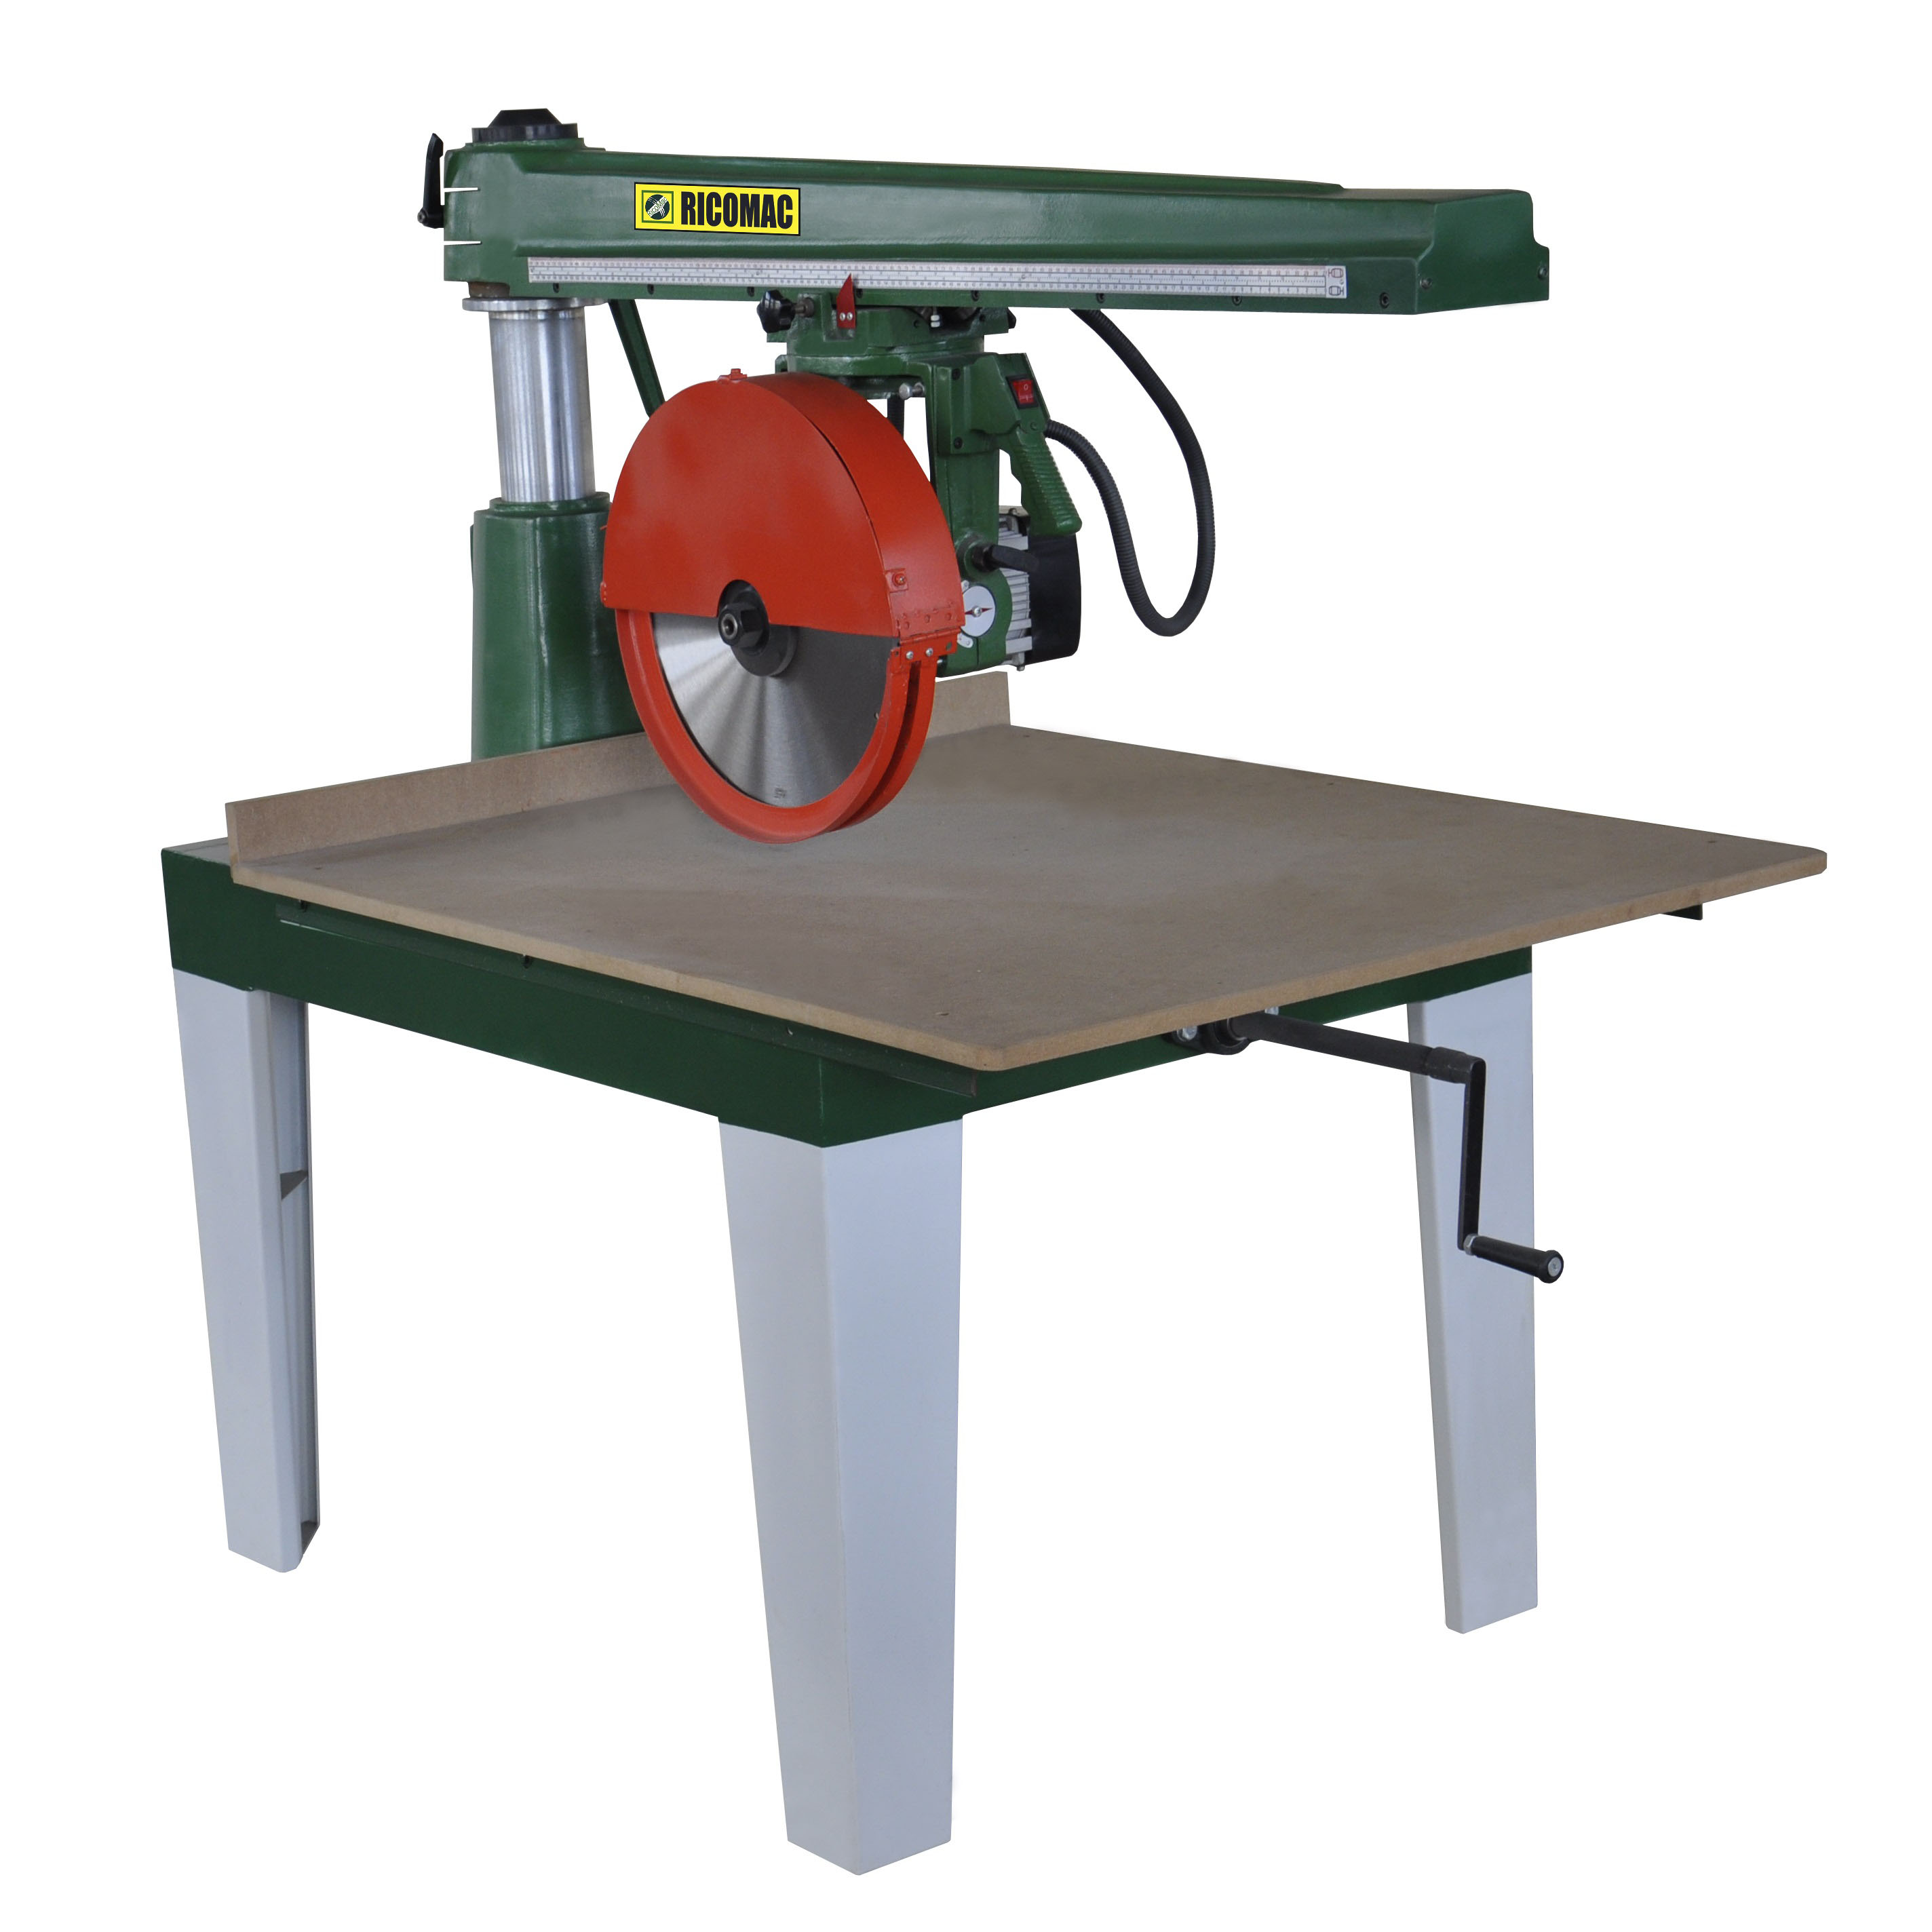 Buy RICO Radial Arm Saw MJ640 Online | Qetaat.com | First construction & industrial platform in Bahrain